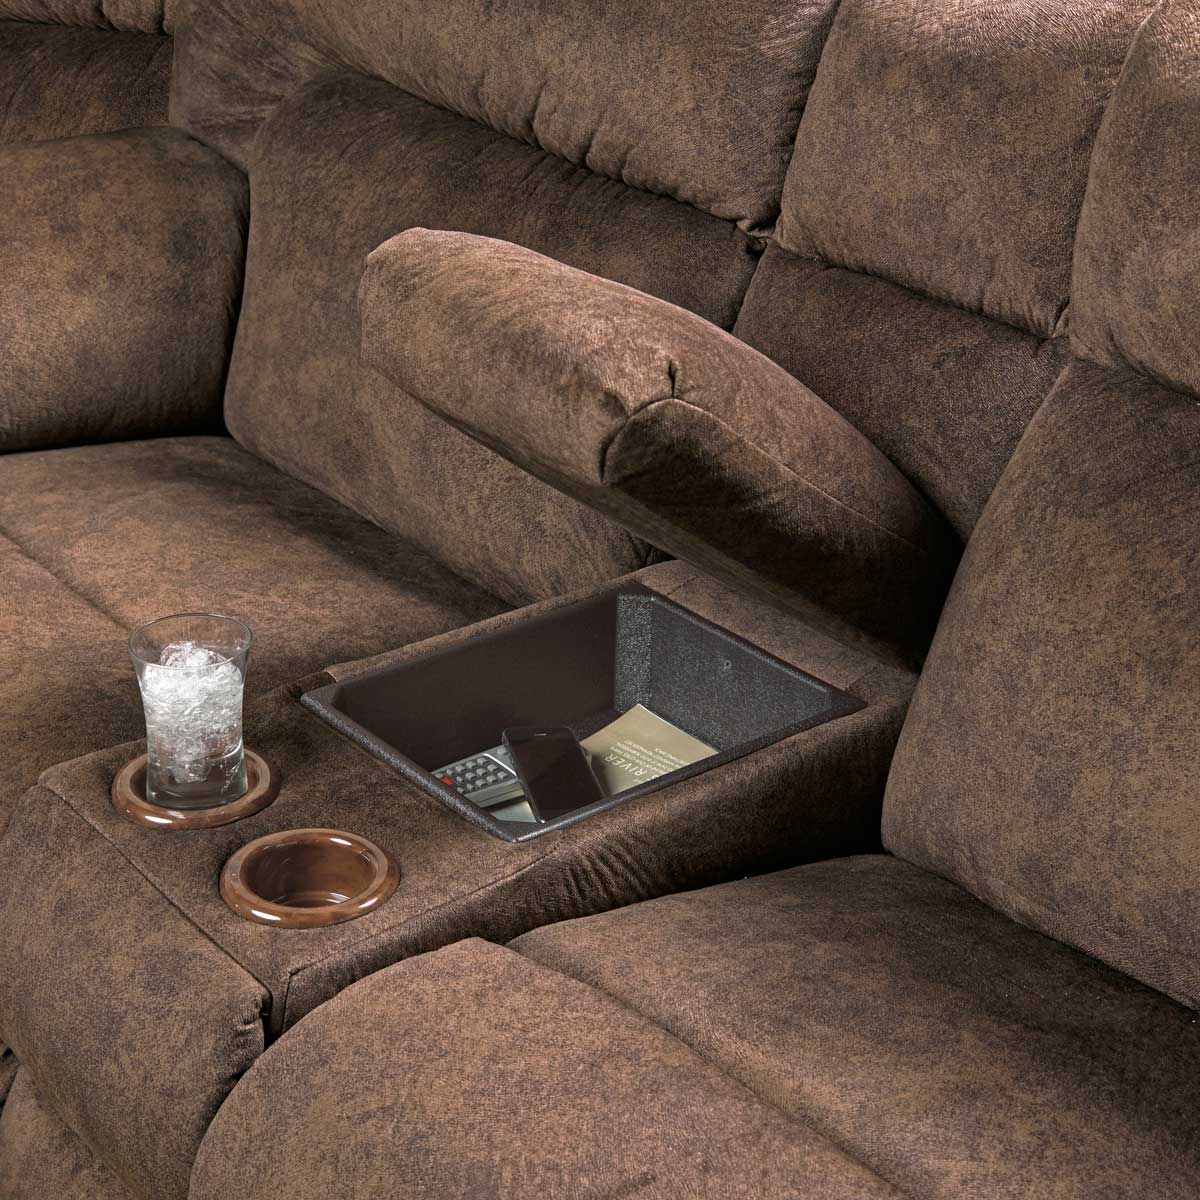 CatNapper Nichols Lay Flat Reclining Console Loveseat with Storage - Cupholders - Chestnut